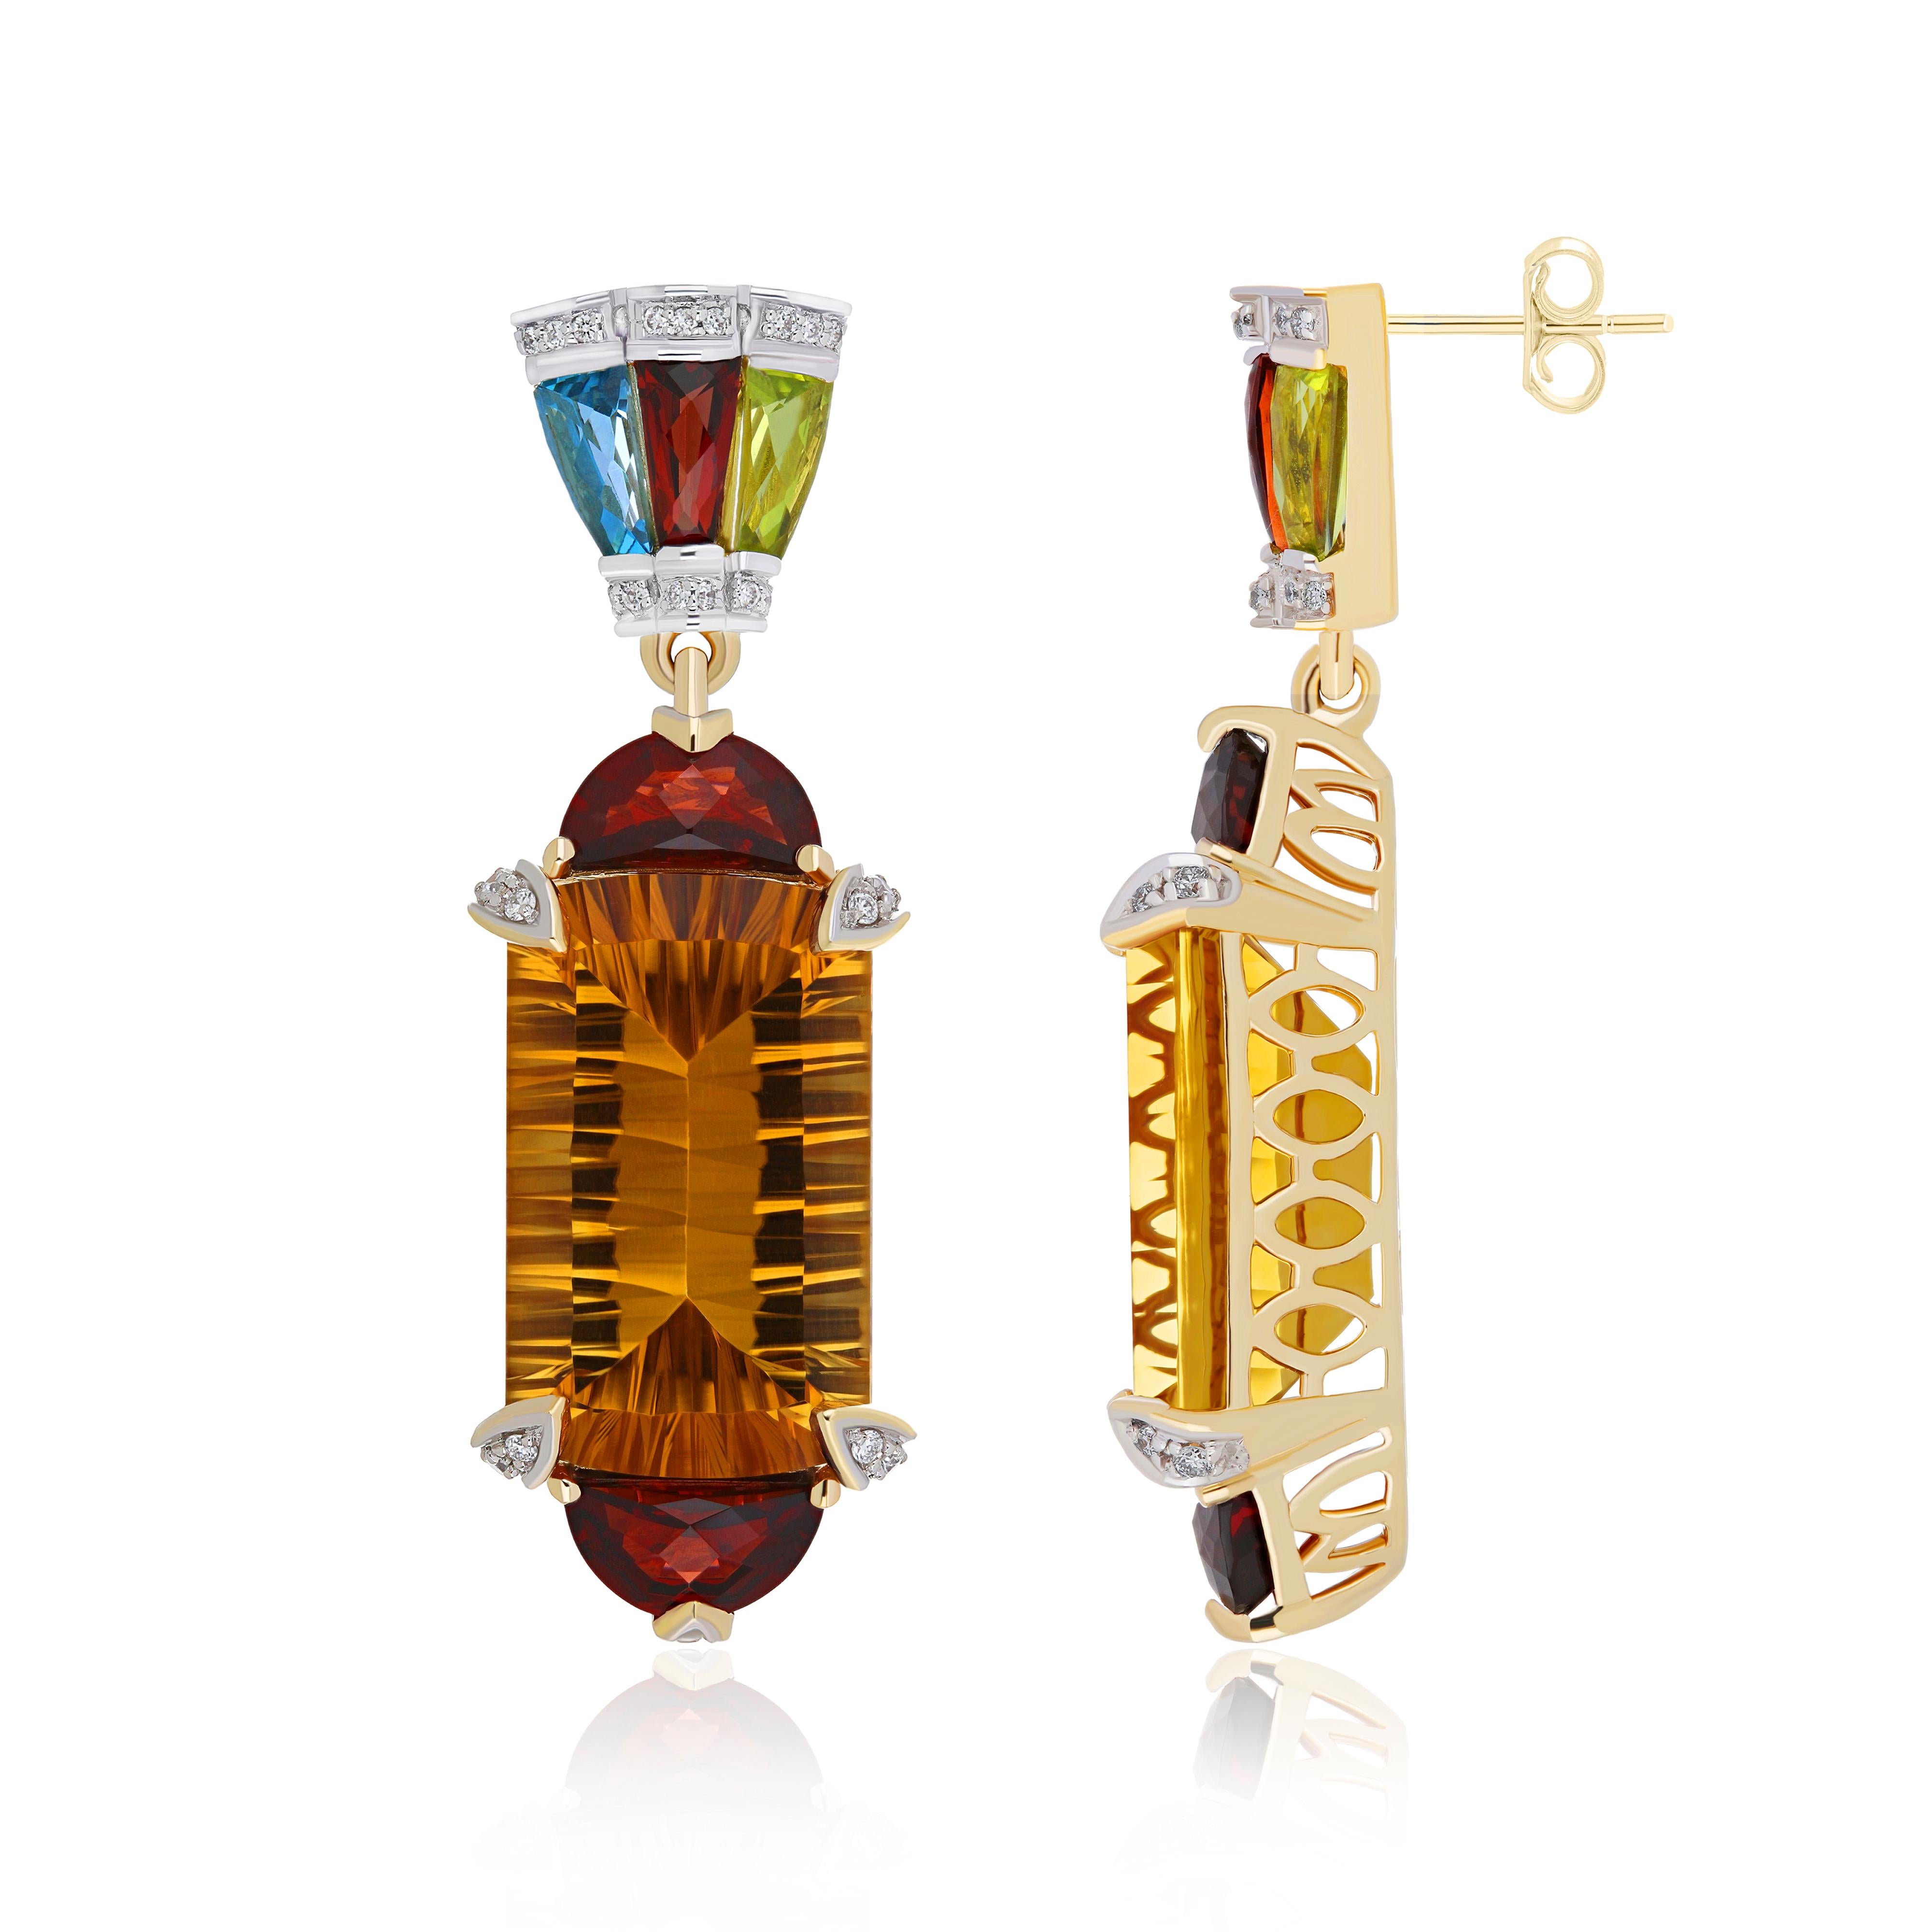 Elegant and Exquisitely Detailed 14 Karat Yellow Gold Earring, Centre Set with 19.50 Cts. (approx.) Fancy Shape Citrine, accented with D shape Garnet weighing approx 4.34Cts, Tapper Baguette Swiss Blue Topaz with 0.68Cts(approx.), Tapper Baguette